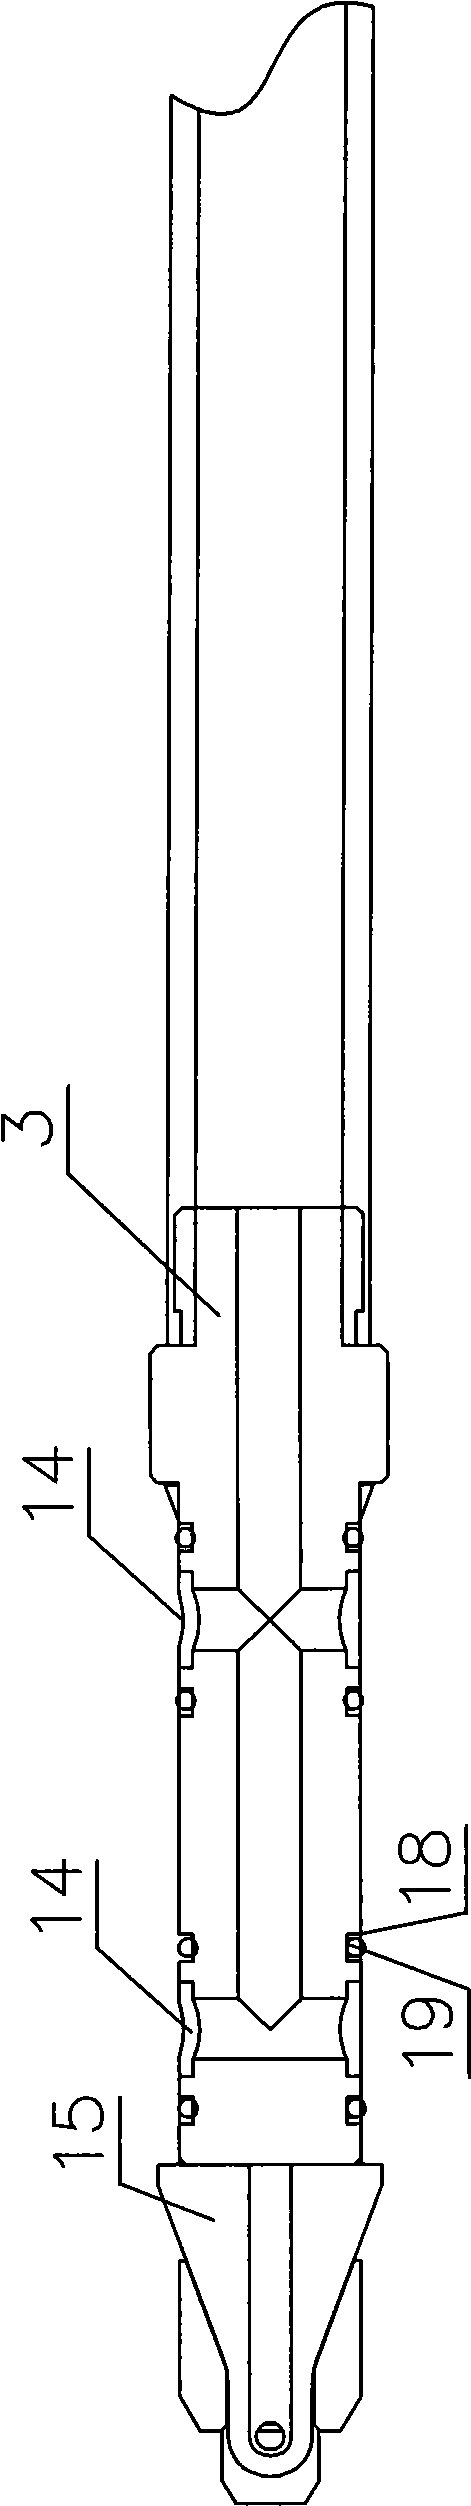 Gas extraction secondary high-pressure slip-casting hole-sealing apparatus and its hole-sealing method